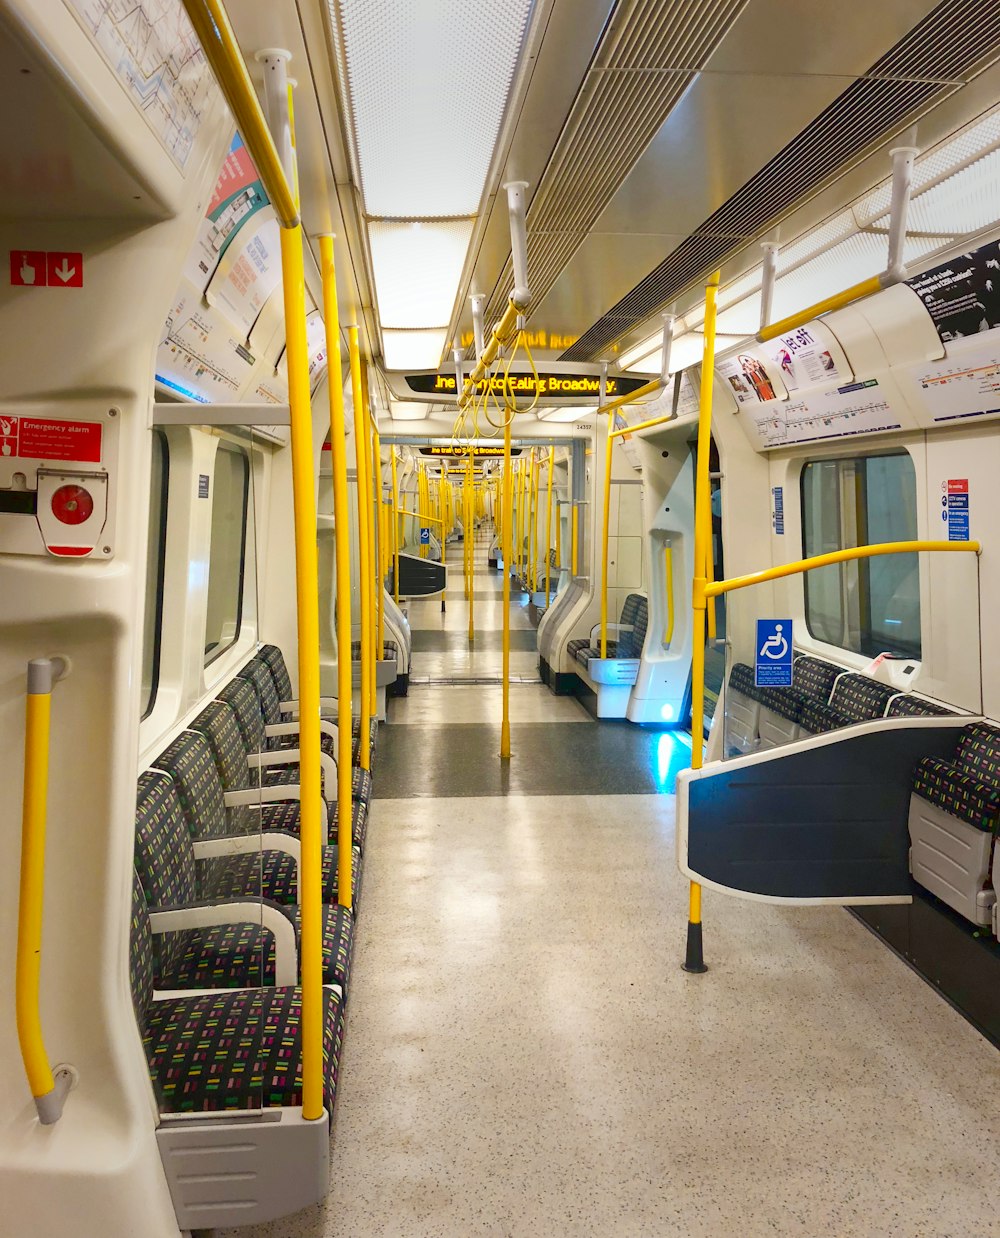 a subway car with yellow railings and seats